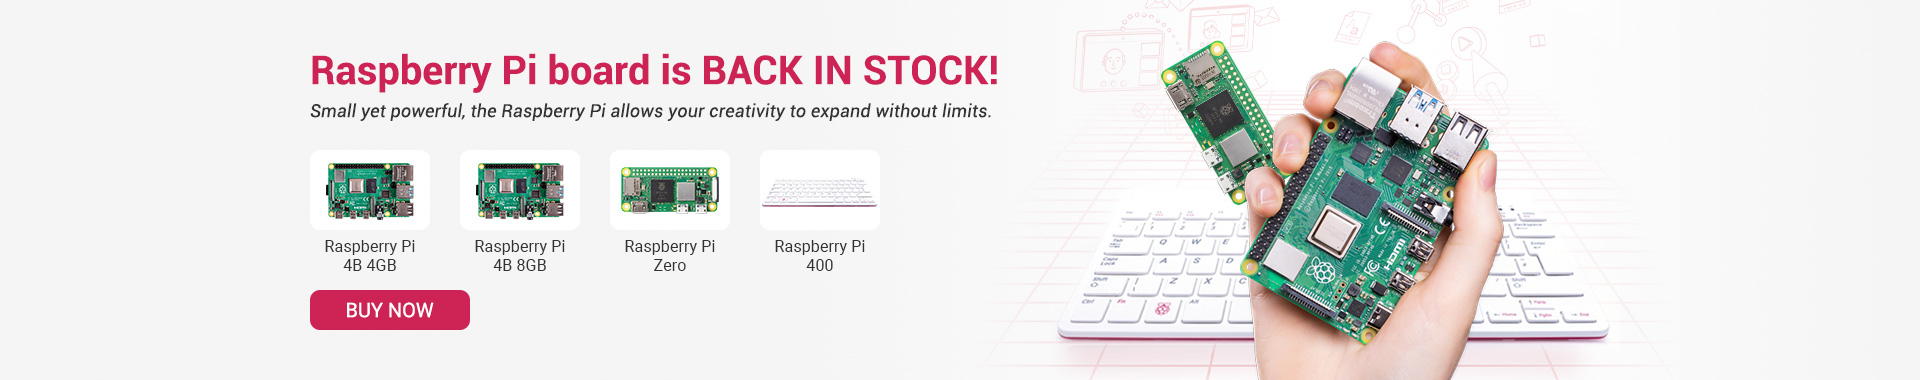 Raspberry Pi is back in stock now 